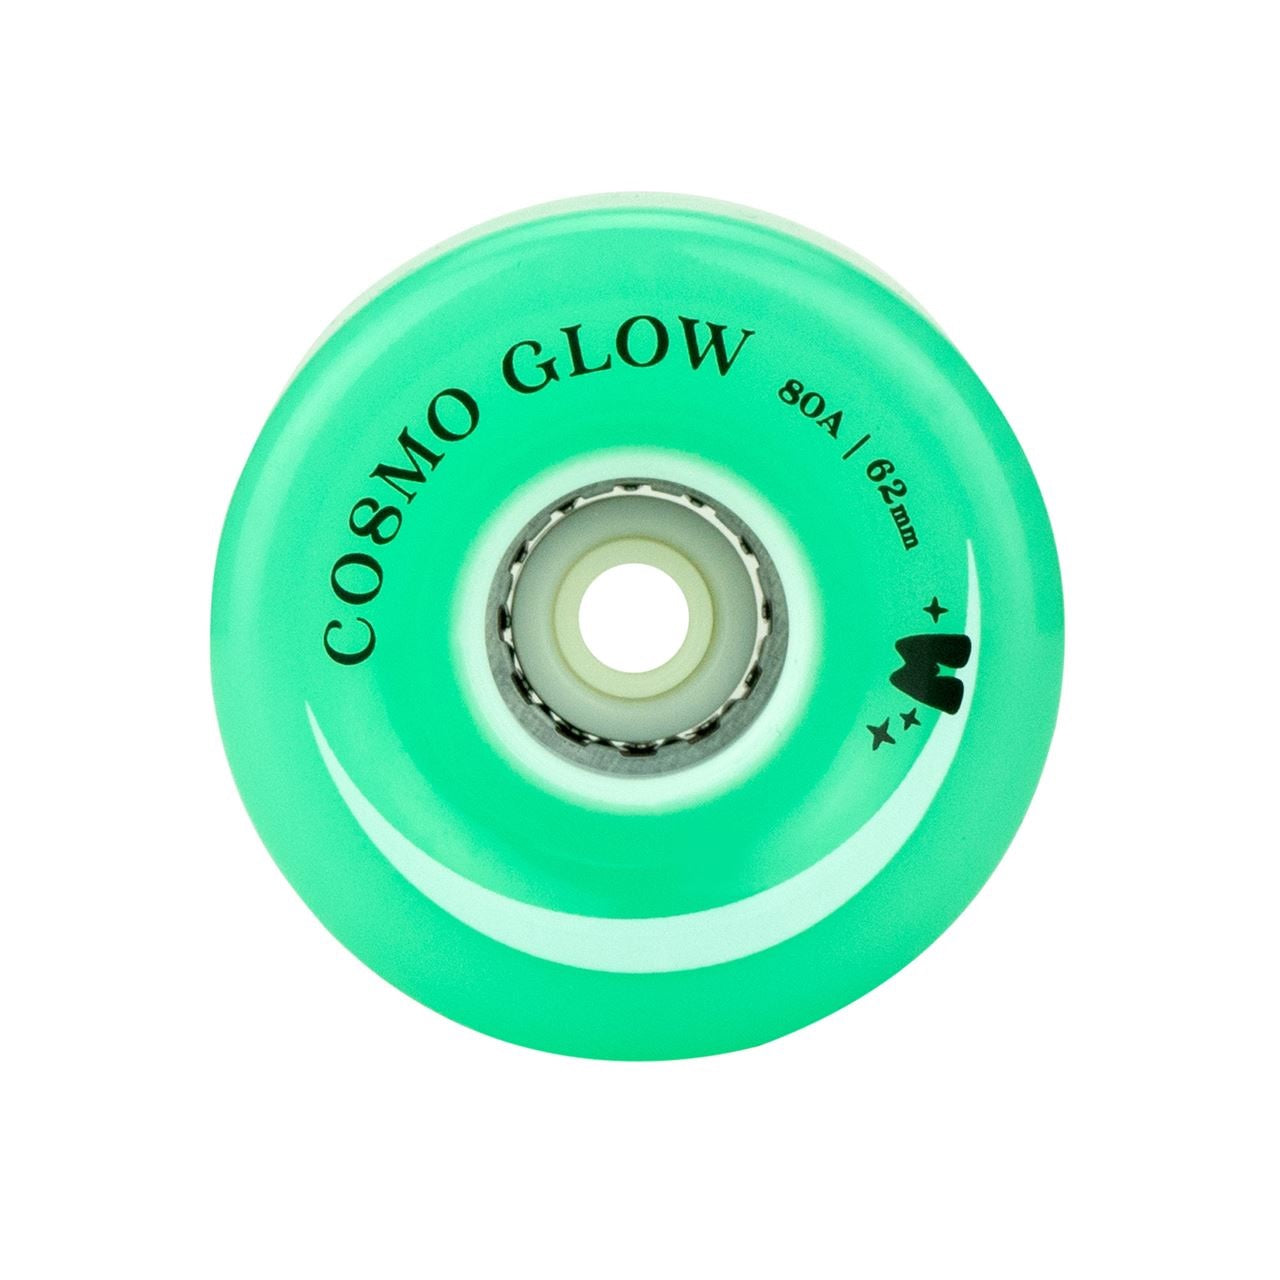 Moxi Cosmo Glow LED Light Up Roller Skate Wheels Galaxy Green 62mm 80a - 4 Pack